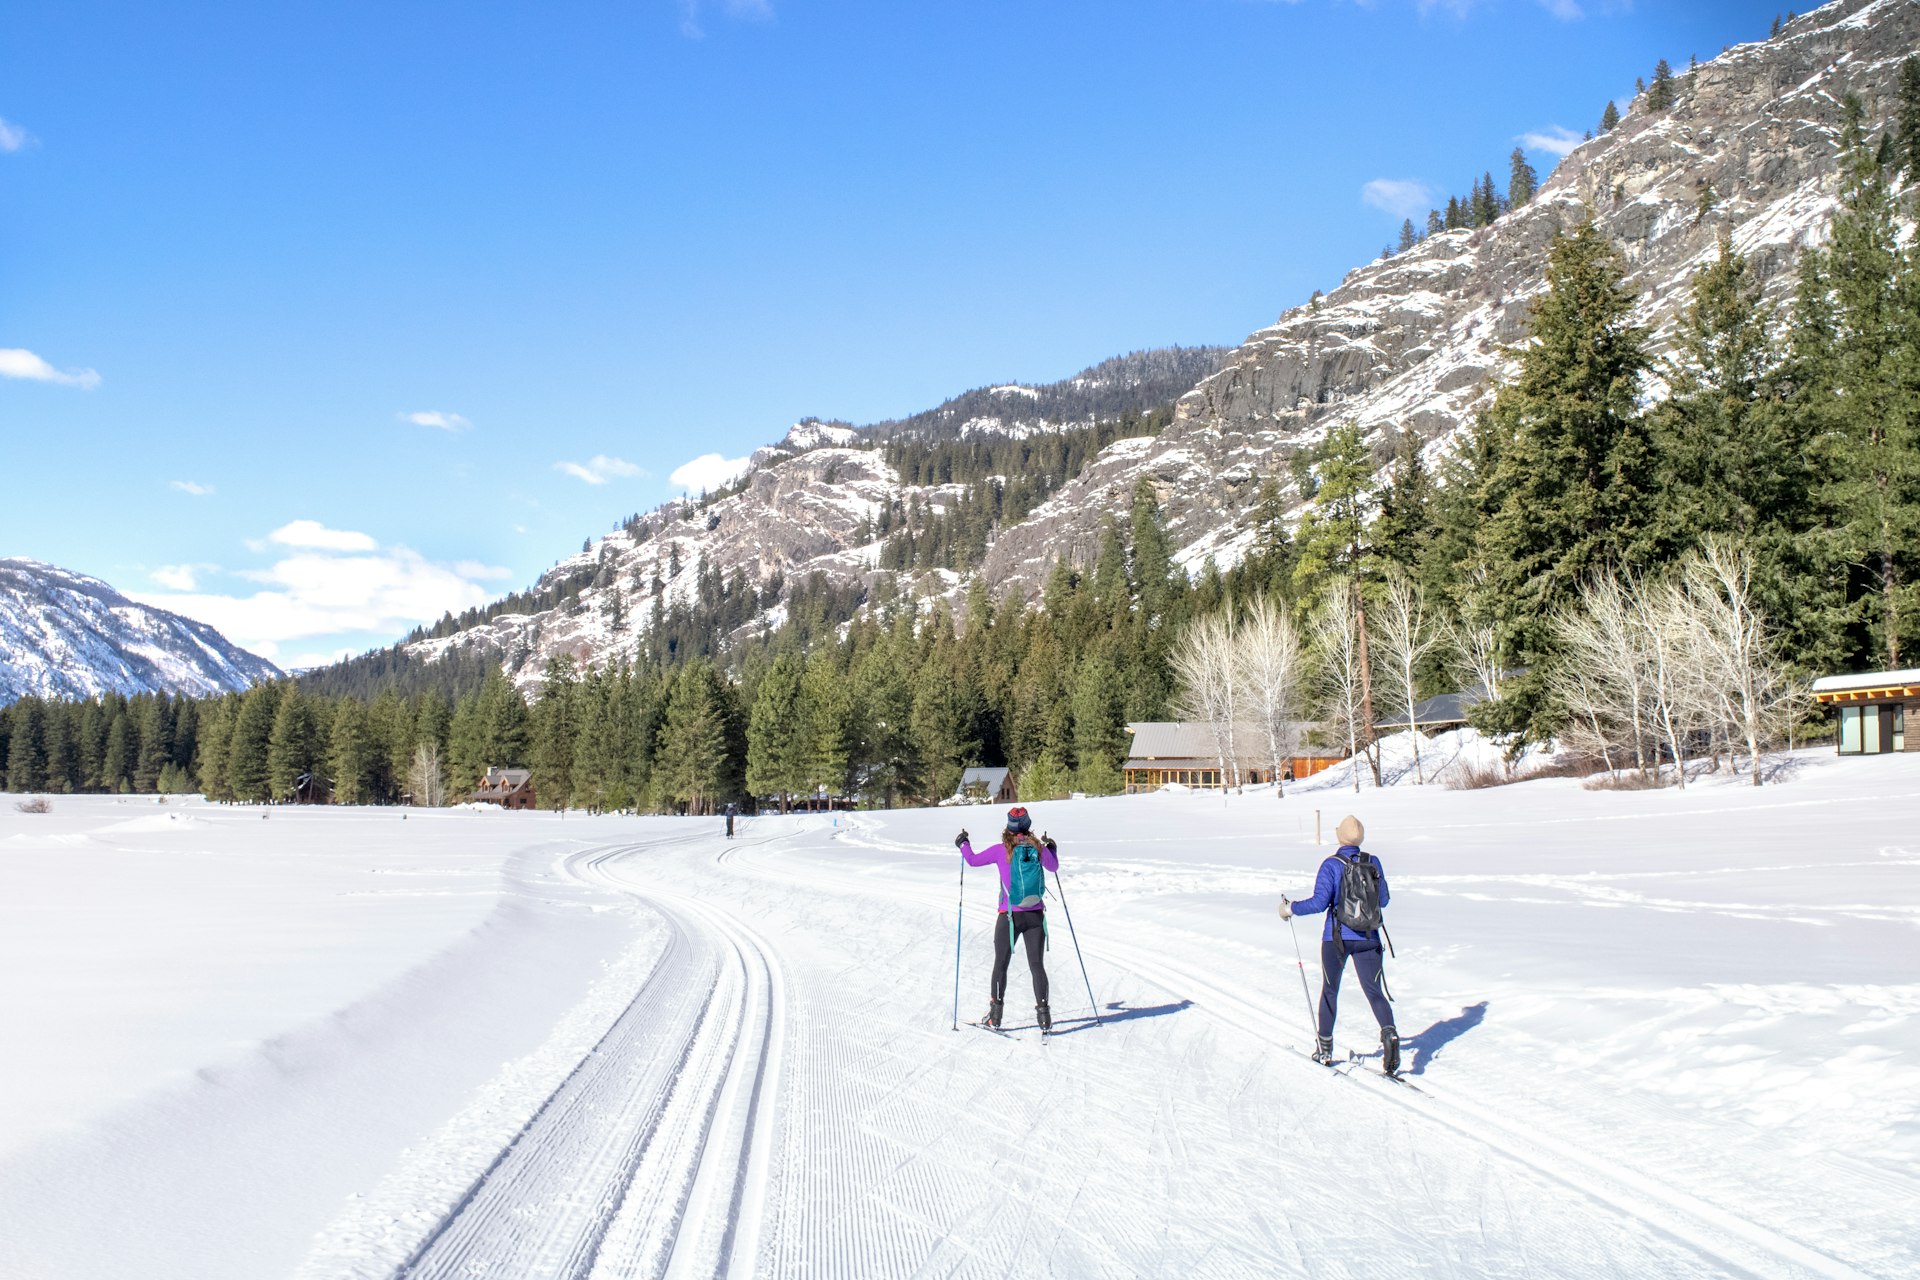 Skiers on trail in the Methow Valley near North Cascades National Park - Washington